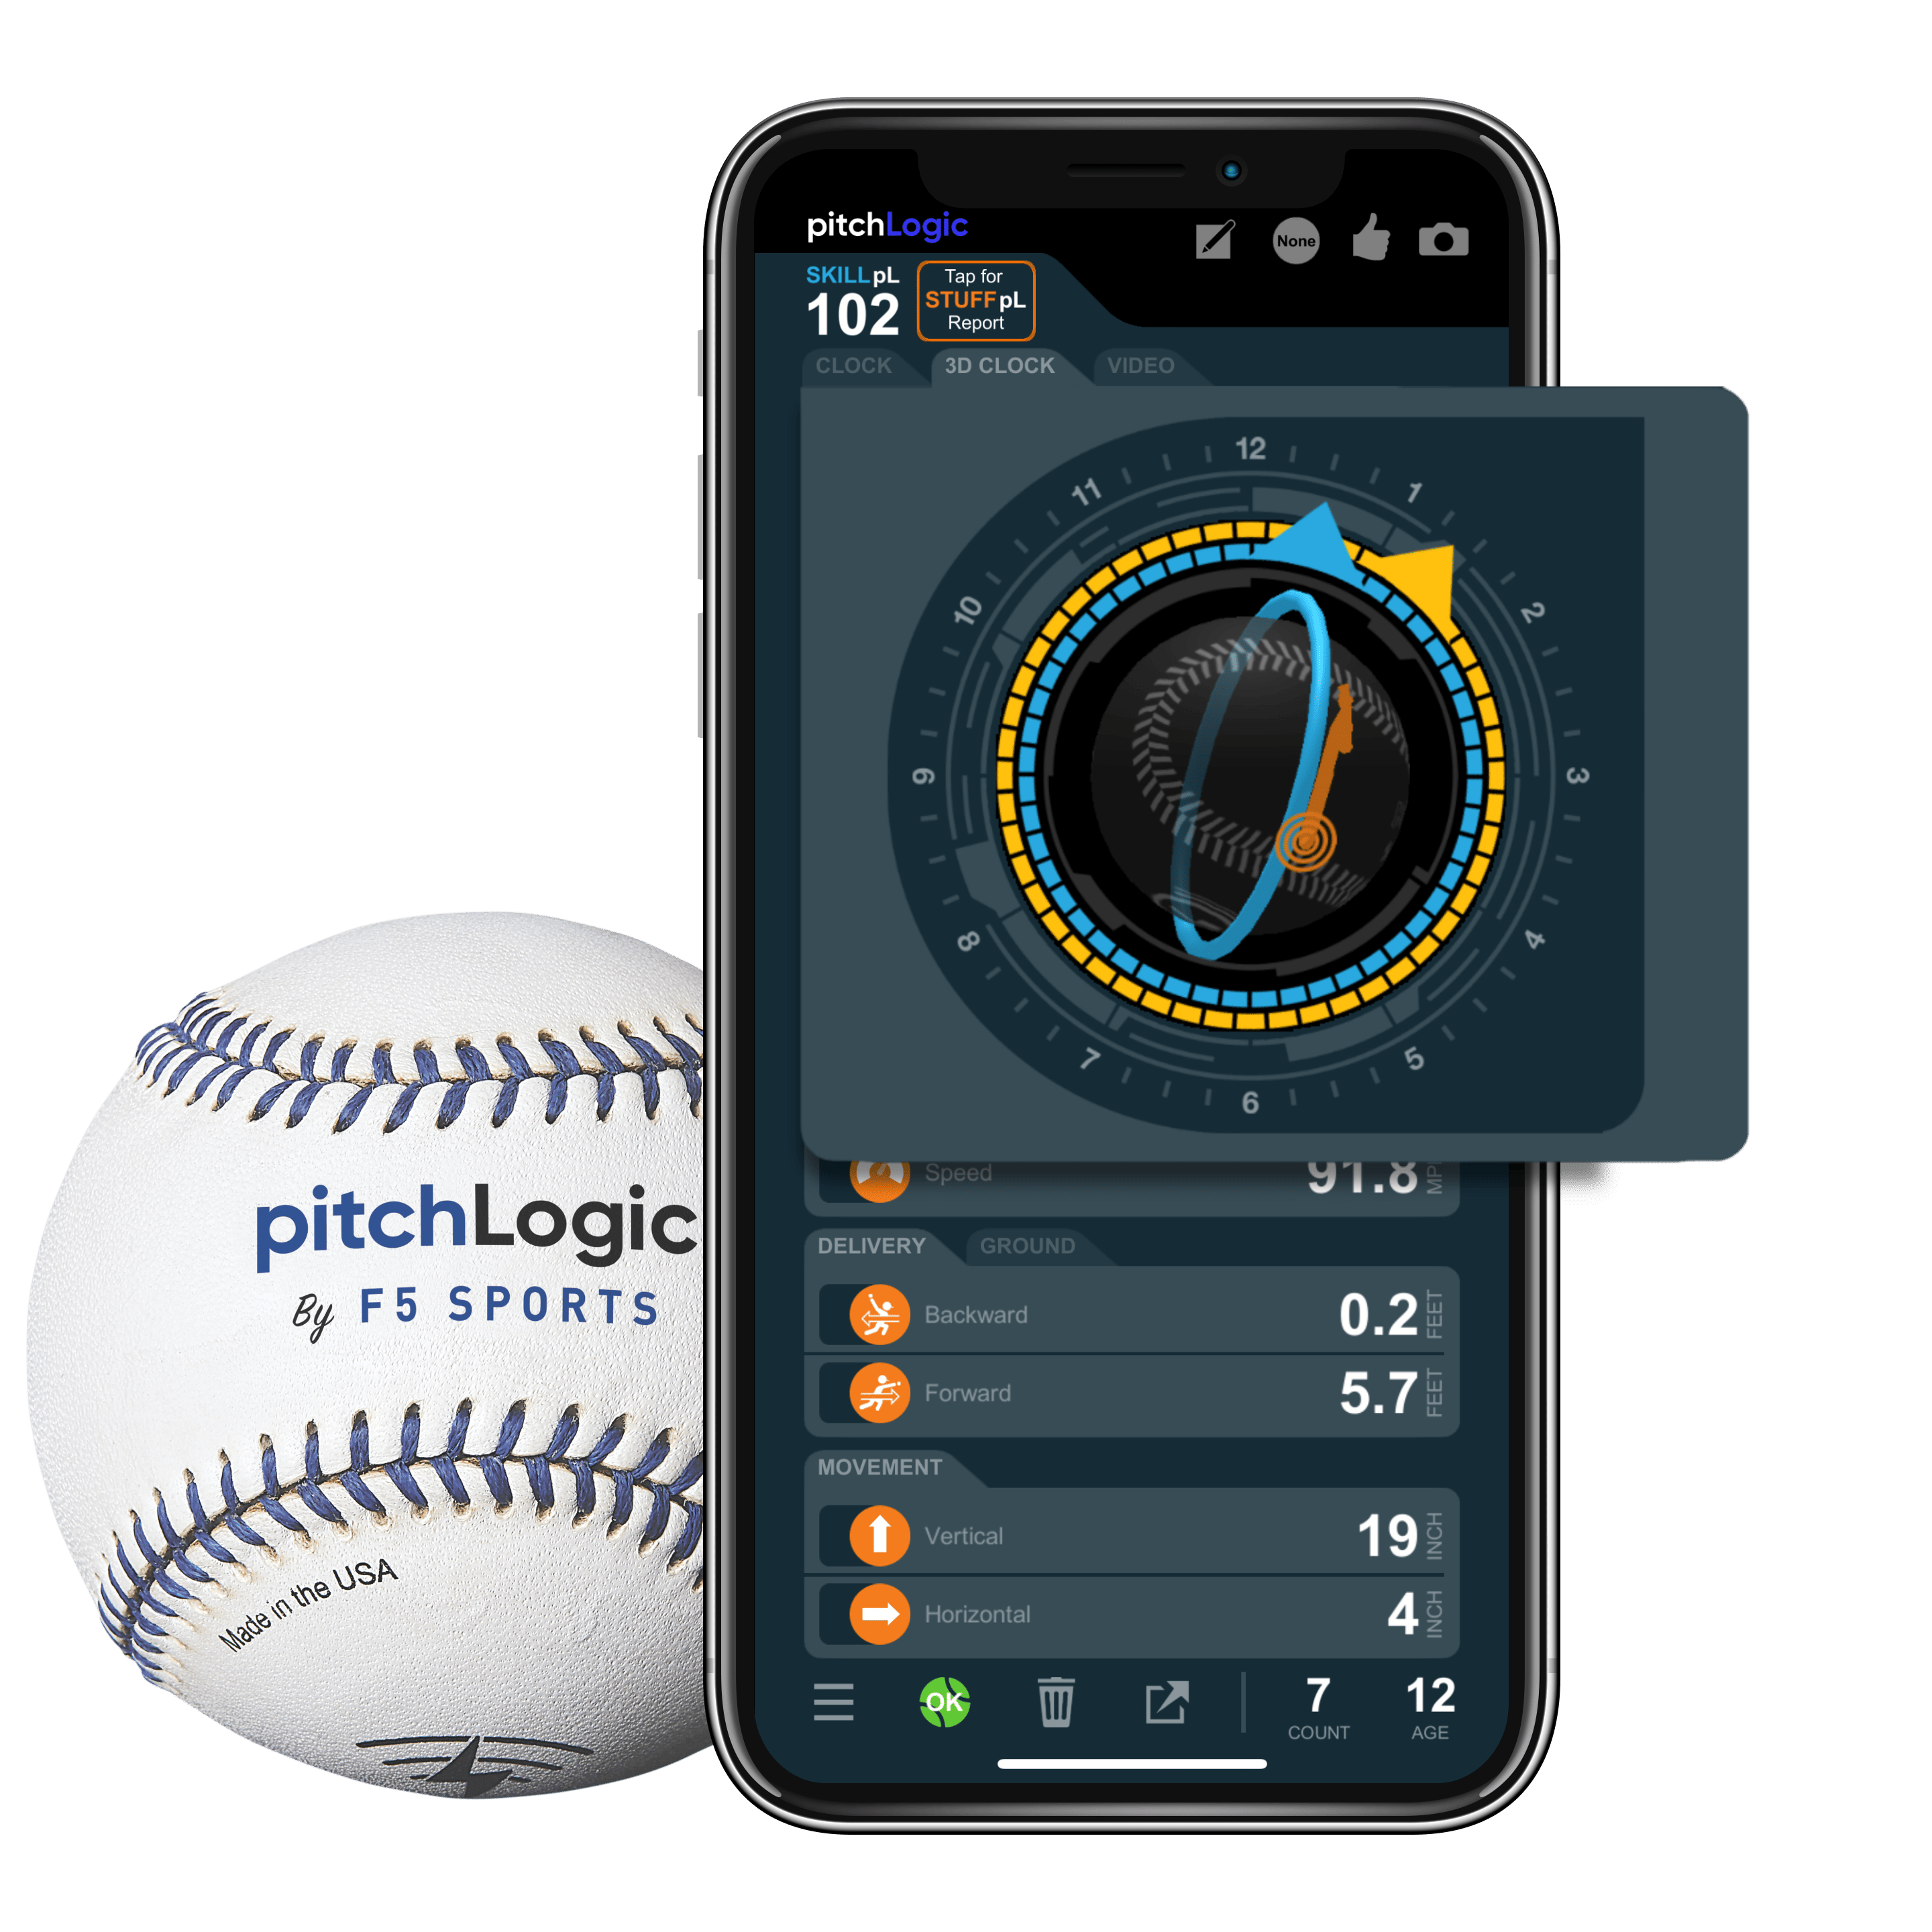 pitchLogic by F5 Sports - Hear how Pittsburgh Pirates #pitcher, Clay Holmes,  uses the #pitchLogic #baseball to work on his devastating 𝙨𝙞𝙣𝙠𝙚𝙧 for  the 2021 season. You have that real-time 